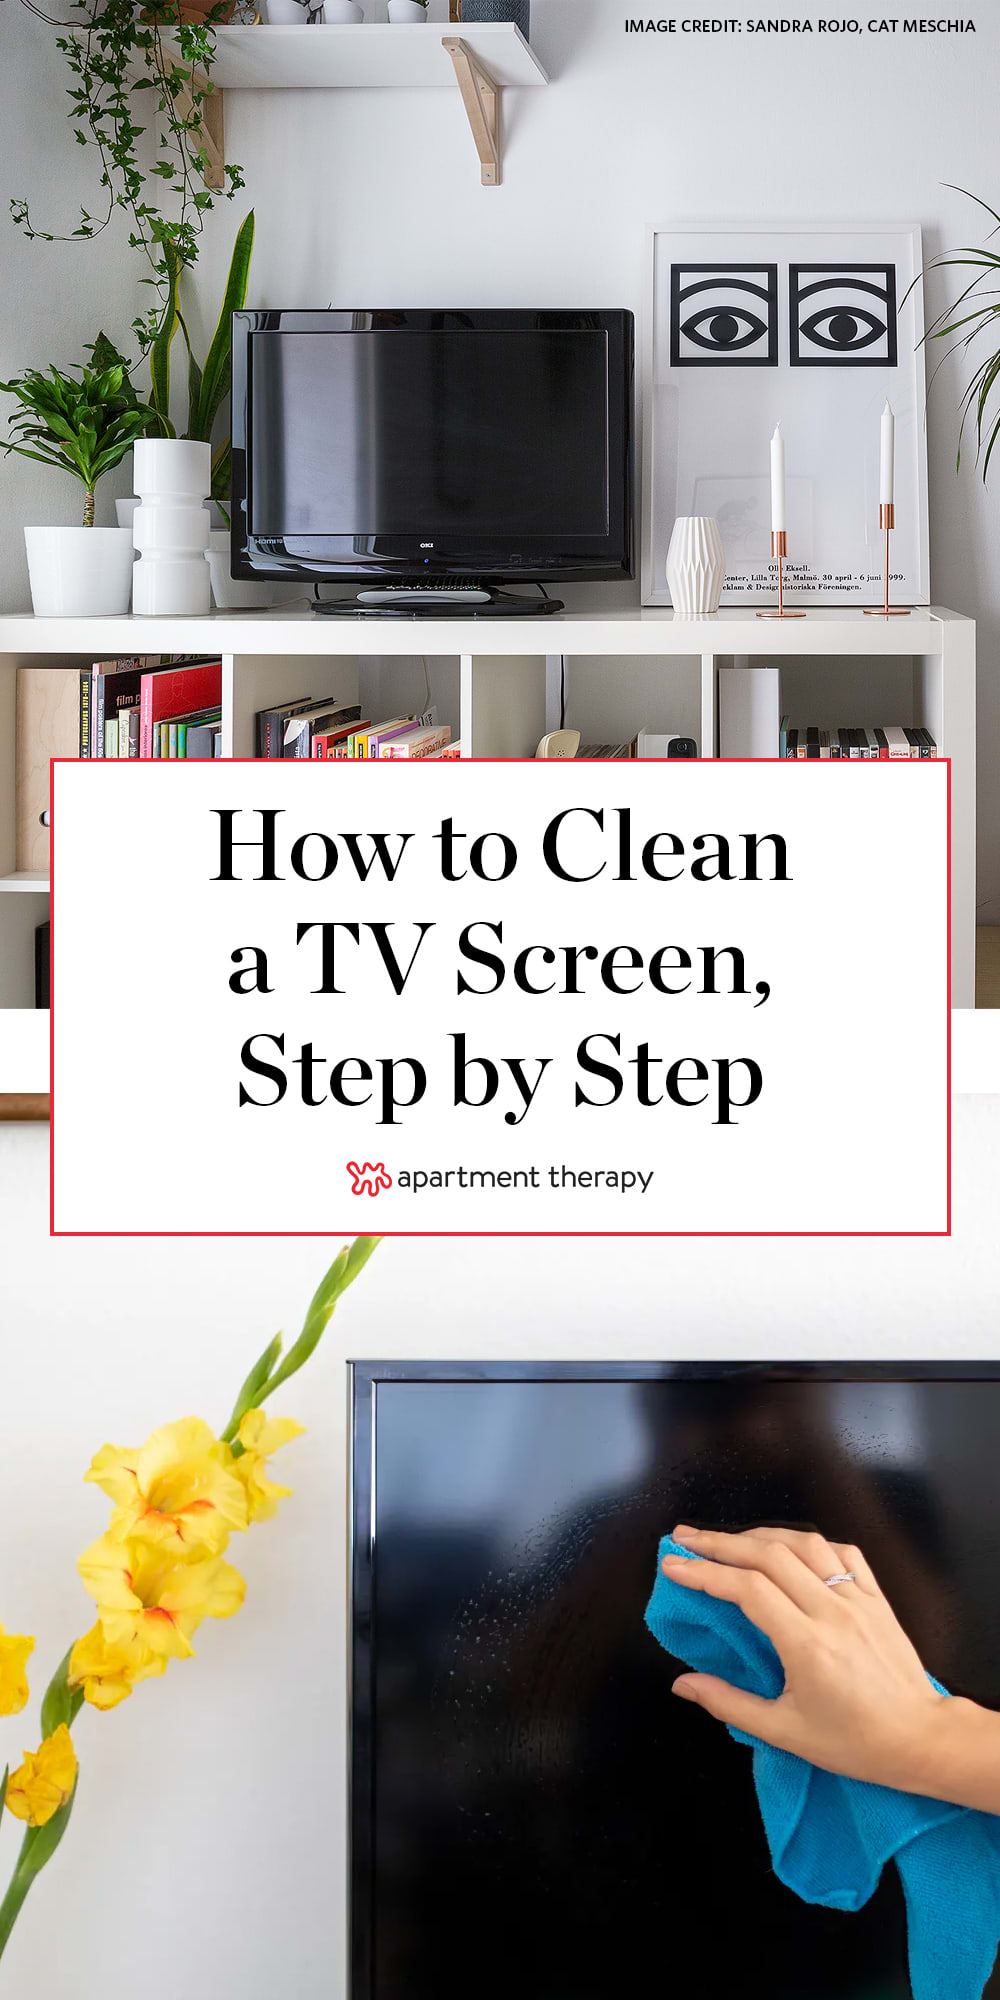 How to Clean a TV Screen: A Step-by-Step Guide With Photos